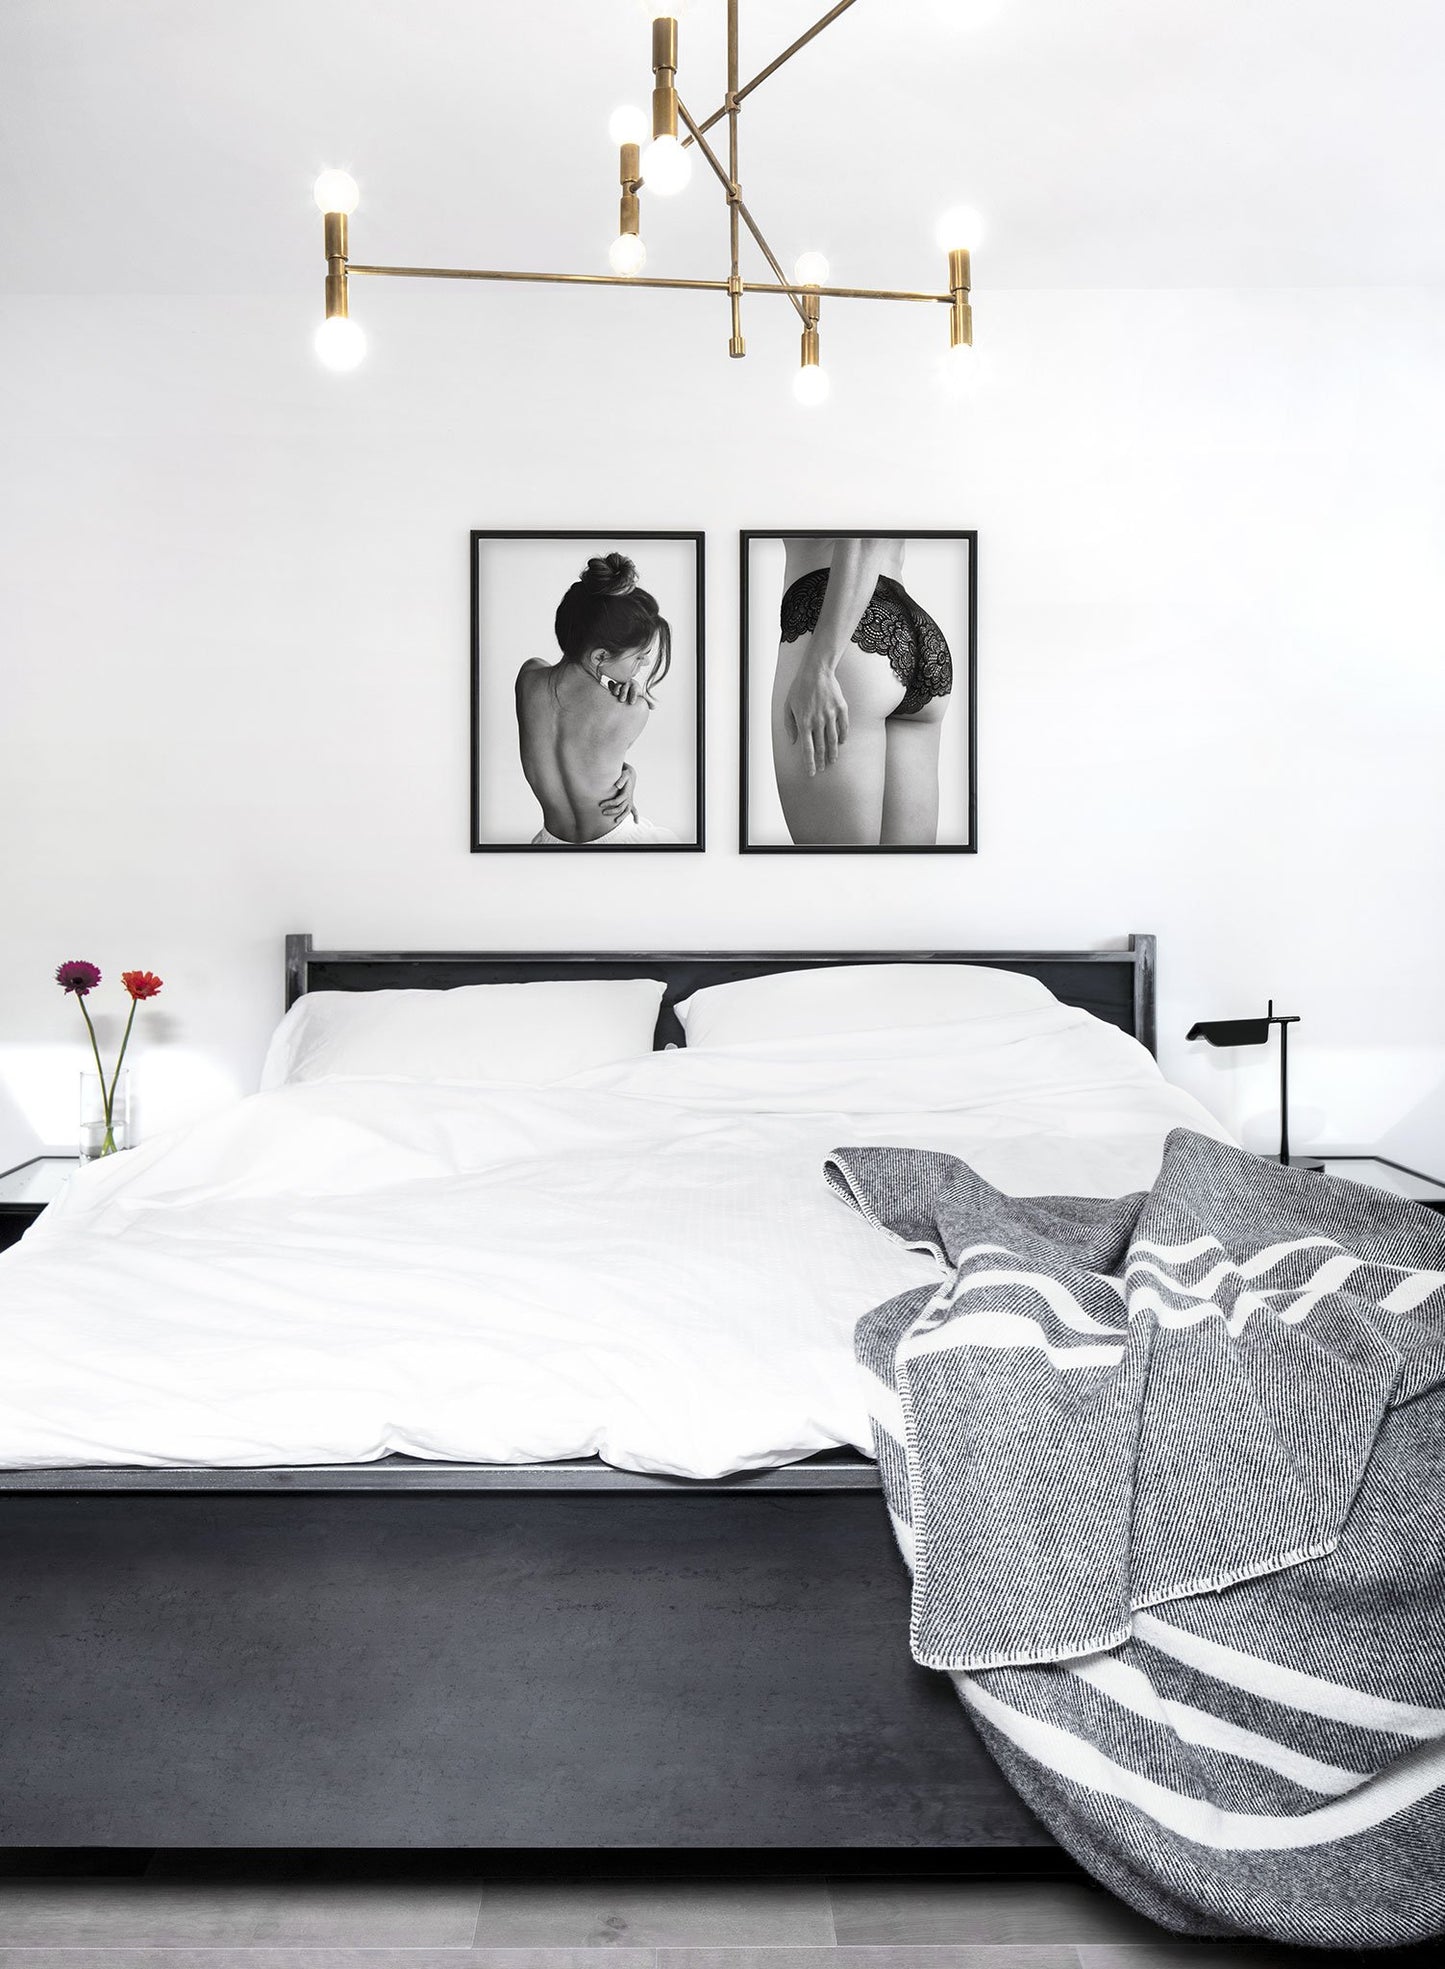 Fashion photography poster by Opposite Wall with nude woman in black and white - Lifestyle Duo - Bedroom